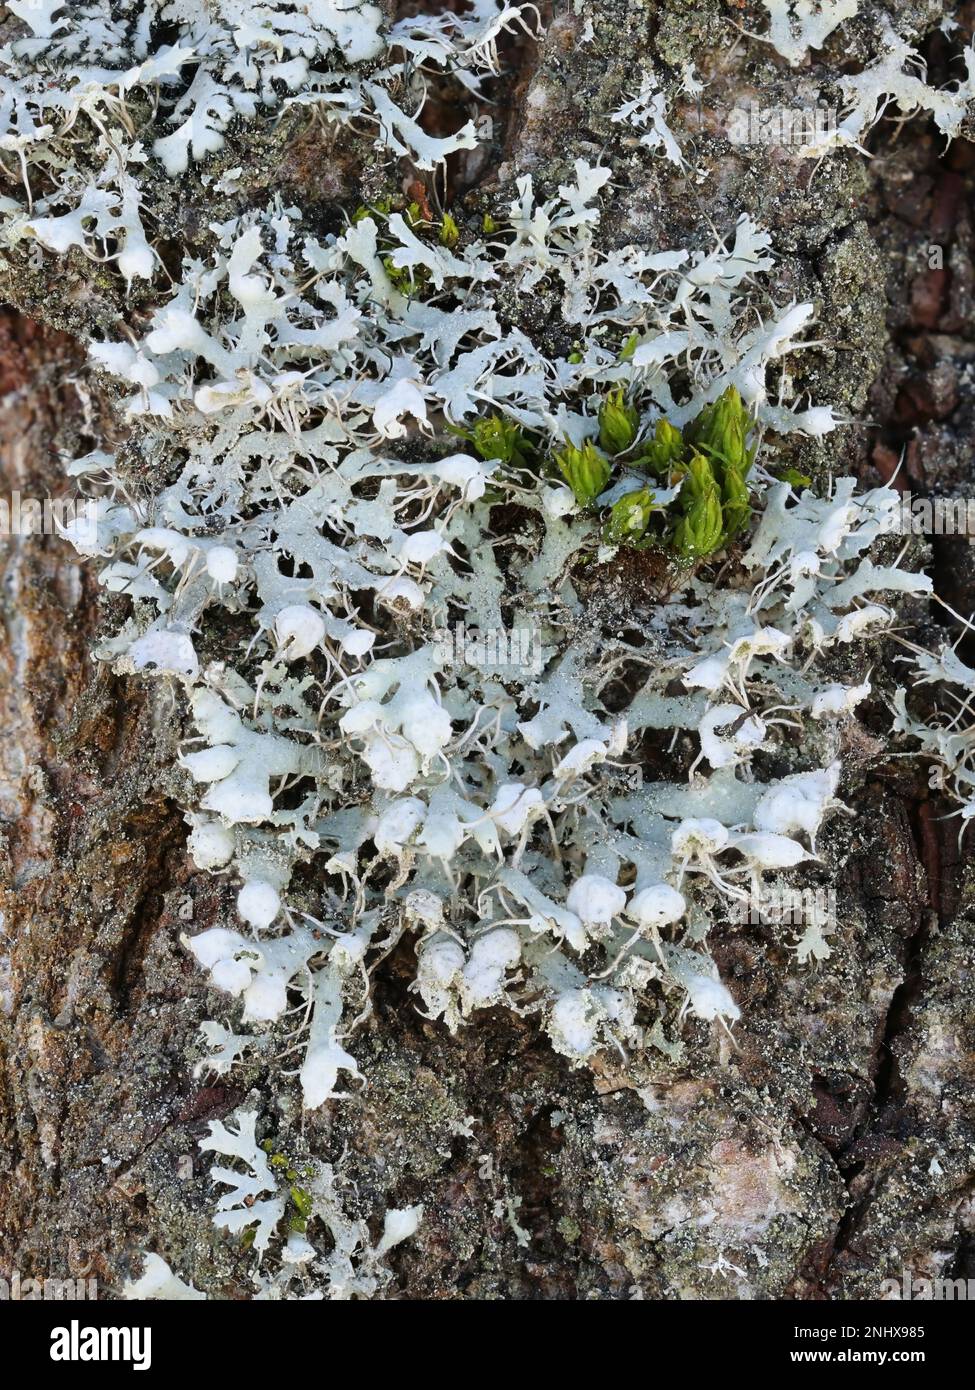 Physcia adscendens, known as Hooded Rosette Lichen Stock Photo